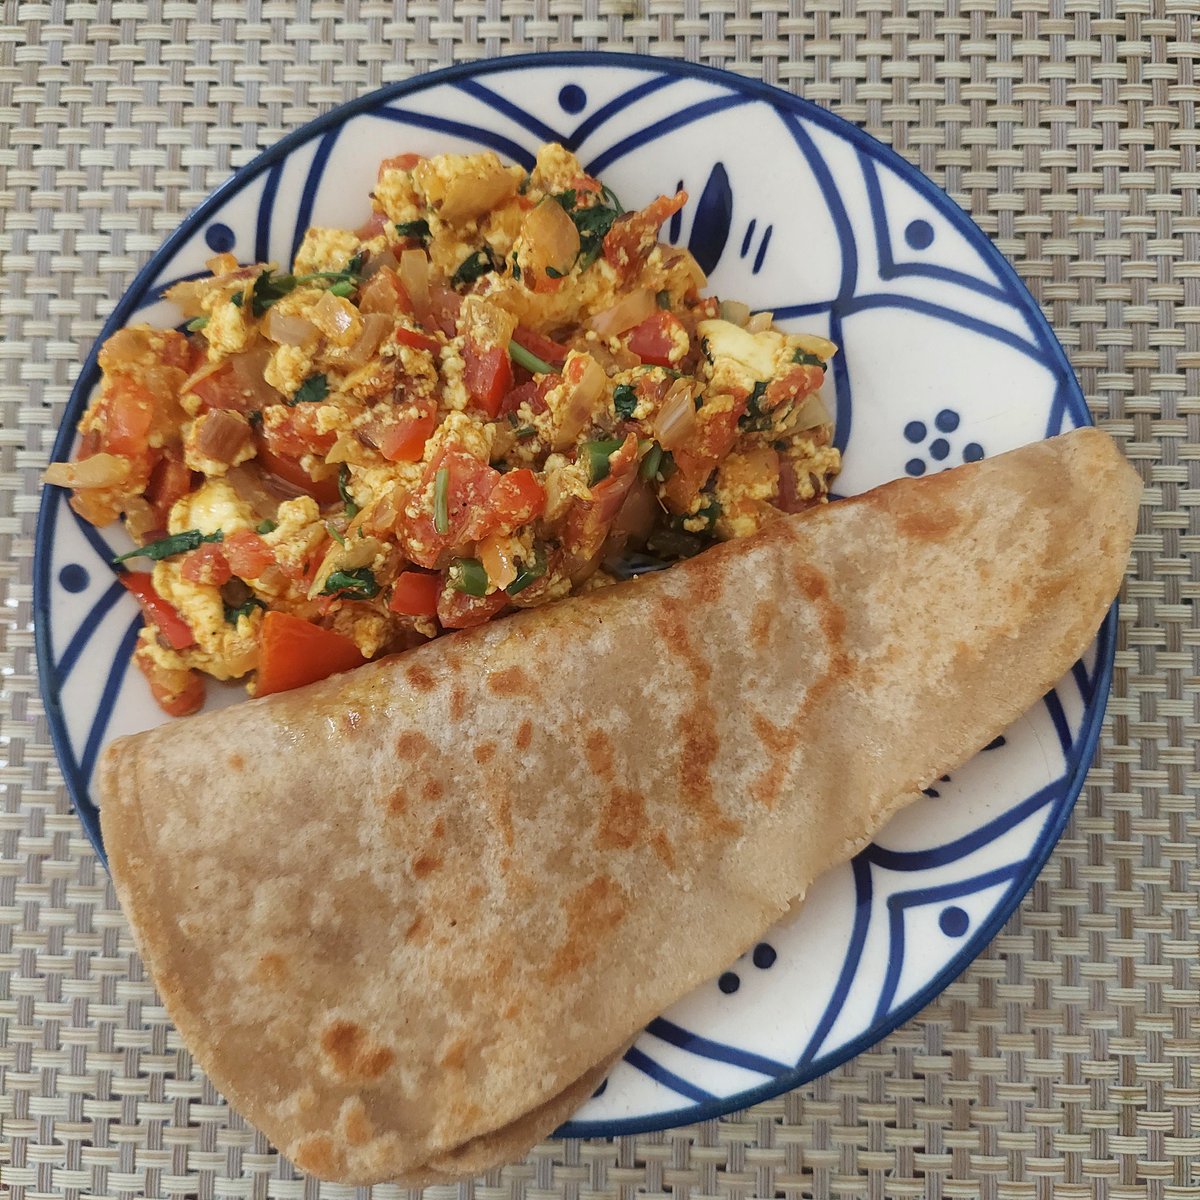 Typical Indian Breakfast ! Paneer Bhurji & WholeWheat Paratha ! 😋 Cottage cheese with Indian spices & herbs 🍅 #Foodie #cookingisfun #cookingishealing ✨💗